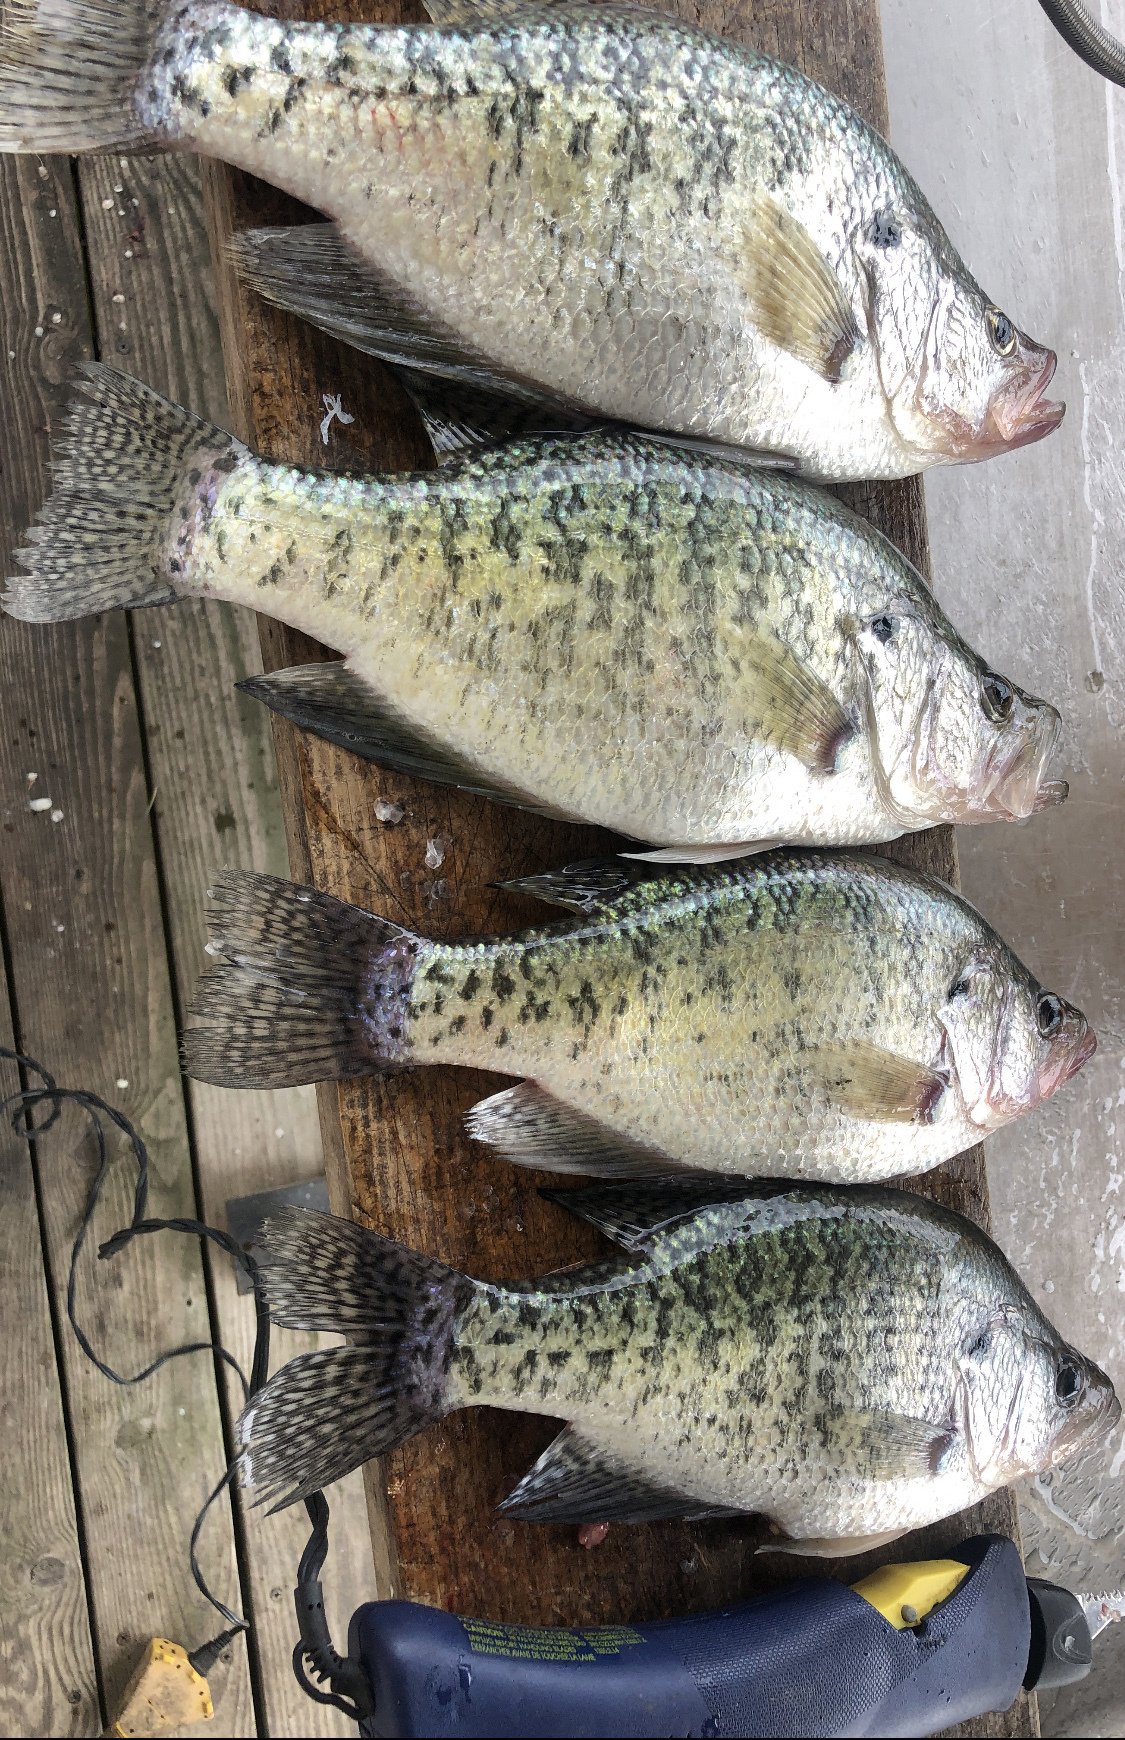 Your Kick'n Bass Fishing Report for April 30, 2020 